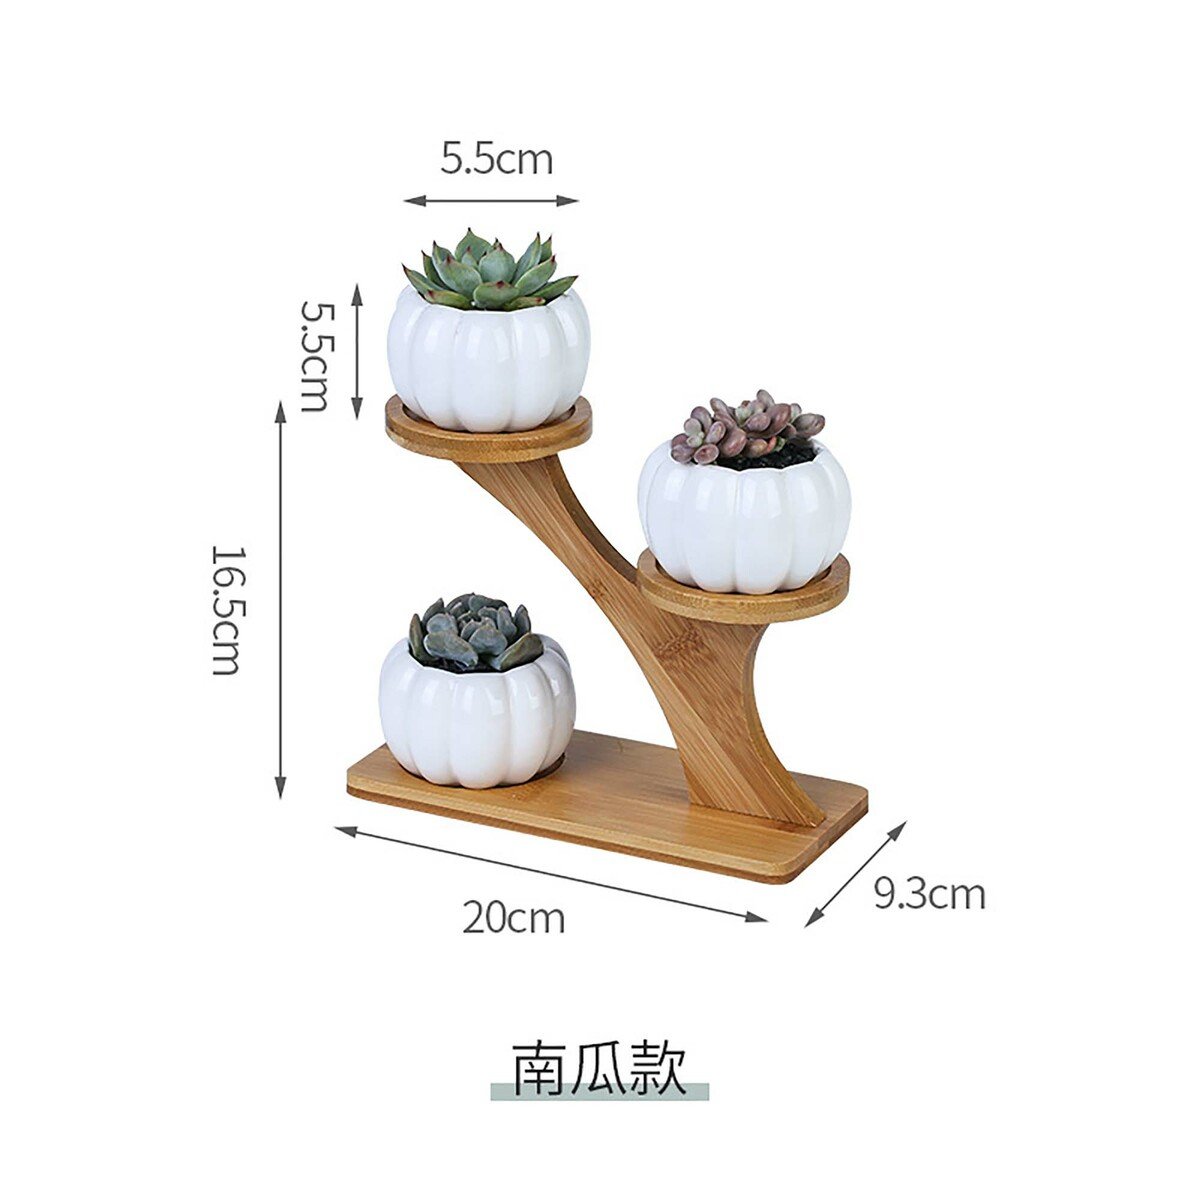 Maple Leaf 3pcs Flower Pot With Wooden Stand JL1212